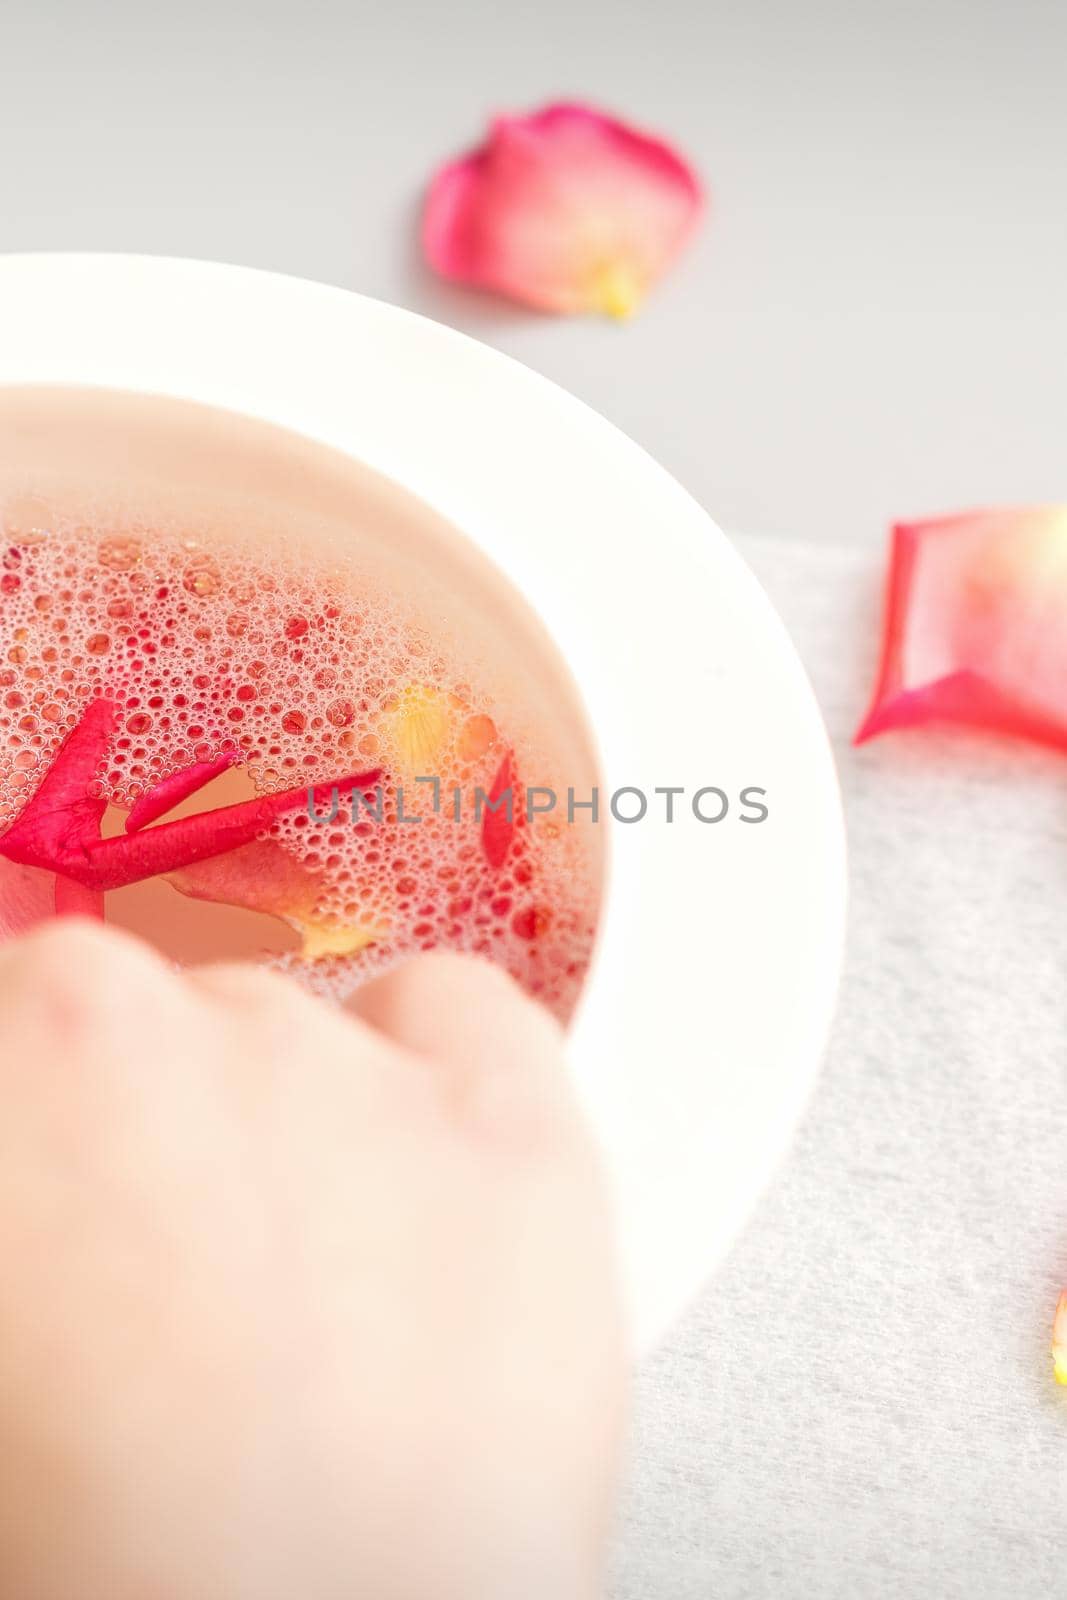 Female hands in a bowl of water with pink petals of rose flowers in spa. by okskukuruza